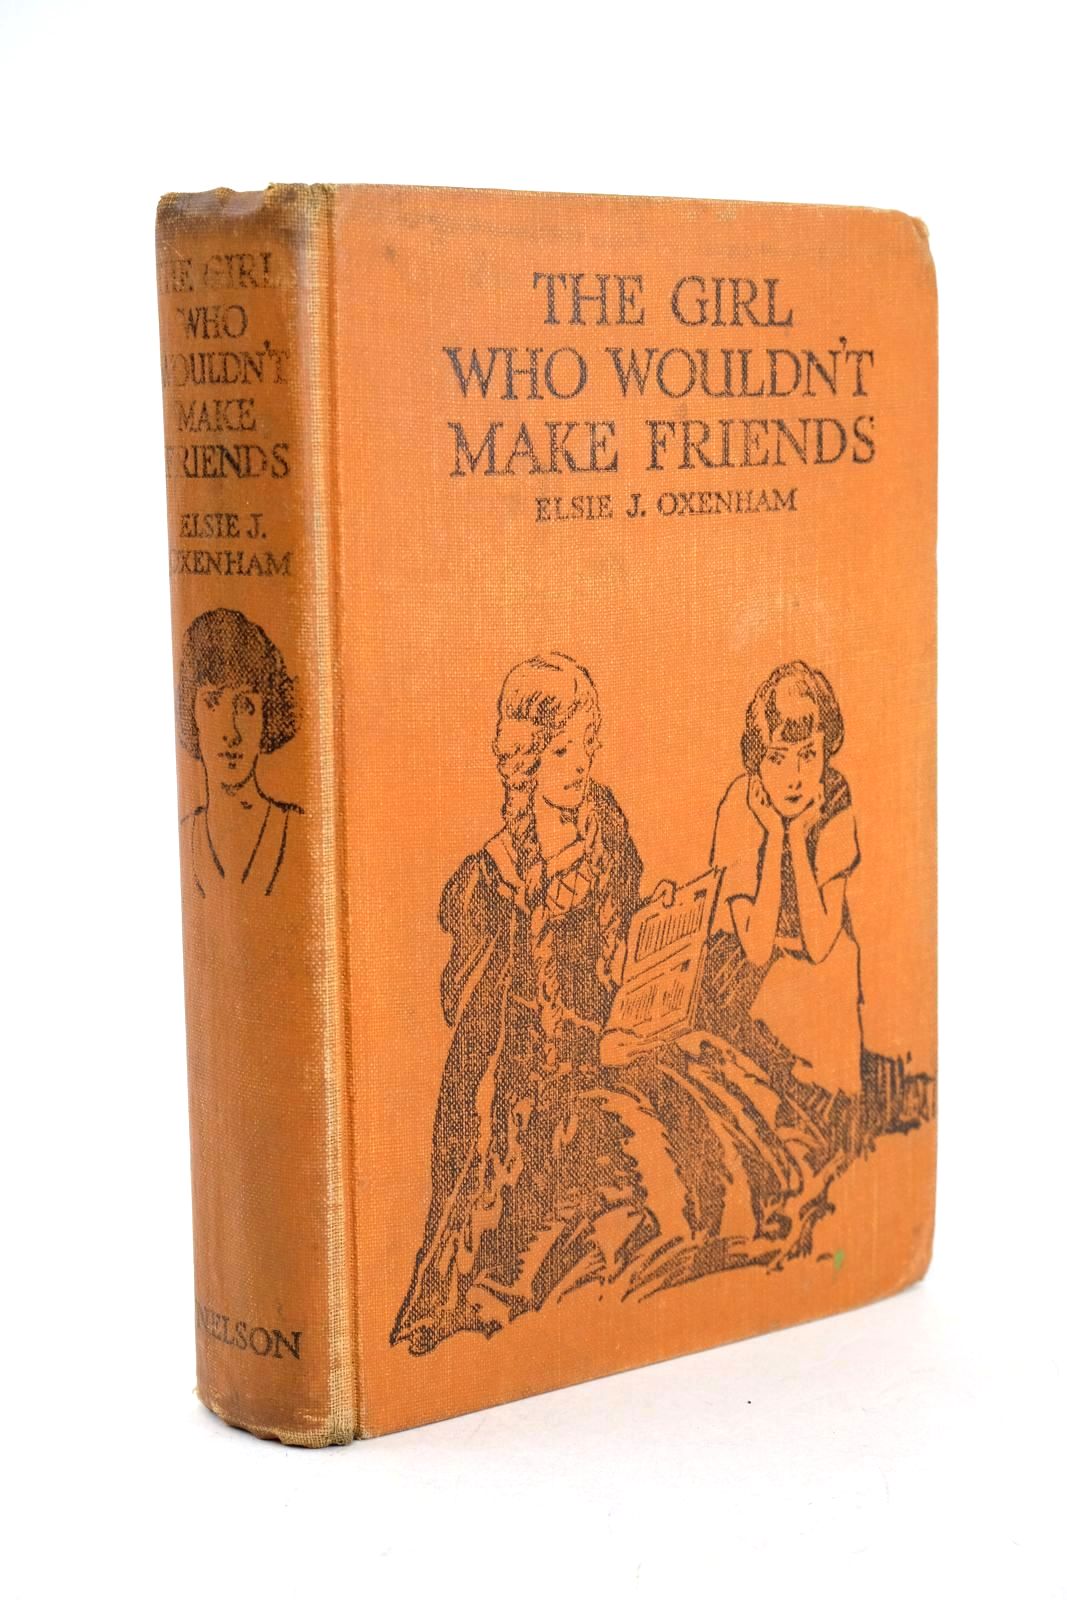 Photo of THE GIRL WHO WOULDN'T MAKE FRIENDS written by Oxenham, Elsie J. illustrated by Hickling, P.B. published by Thomas Nelson and Sons Ltd. (STOCK CODE: 1327046)  for sale by Stella & Rose's Books